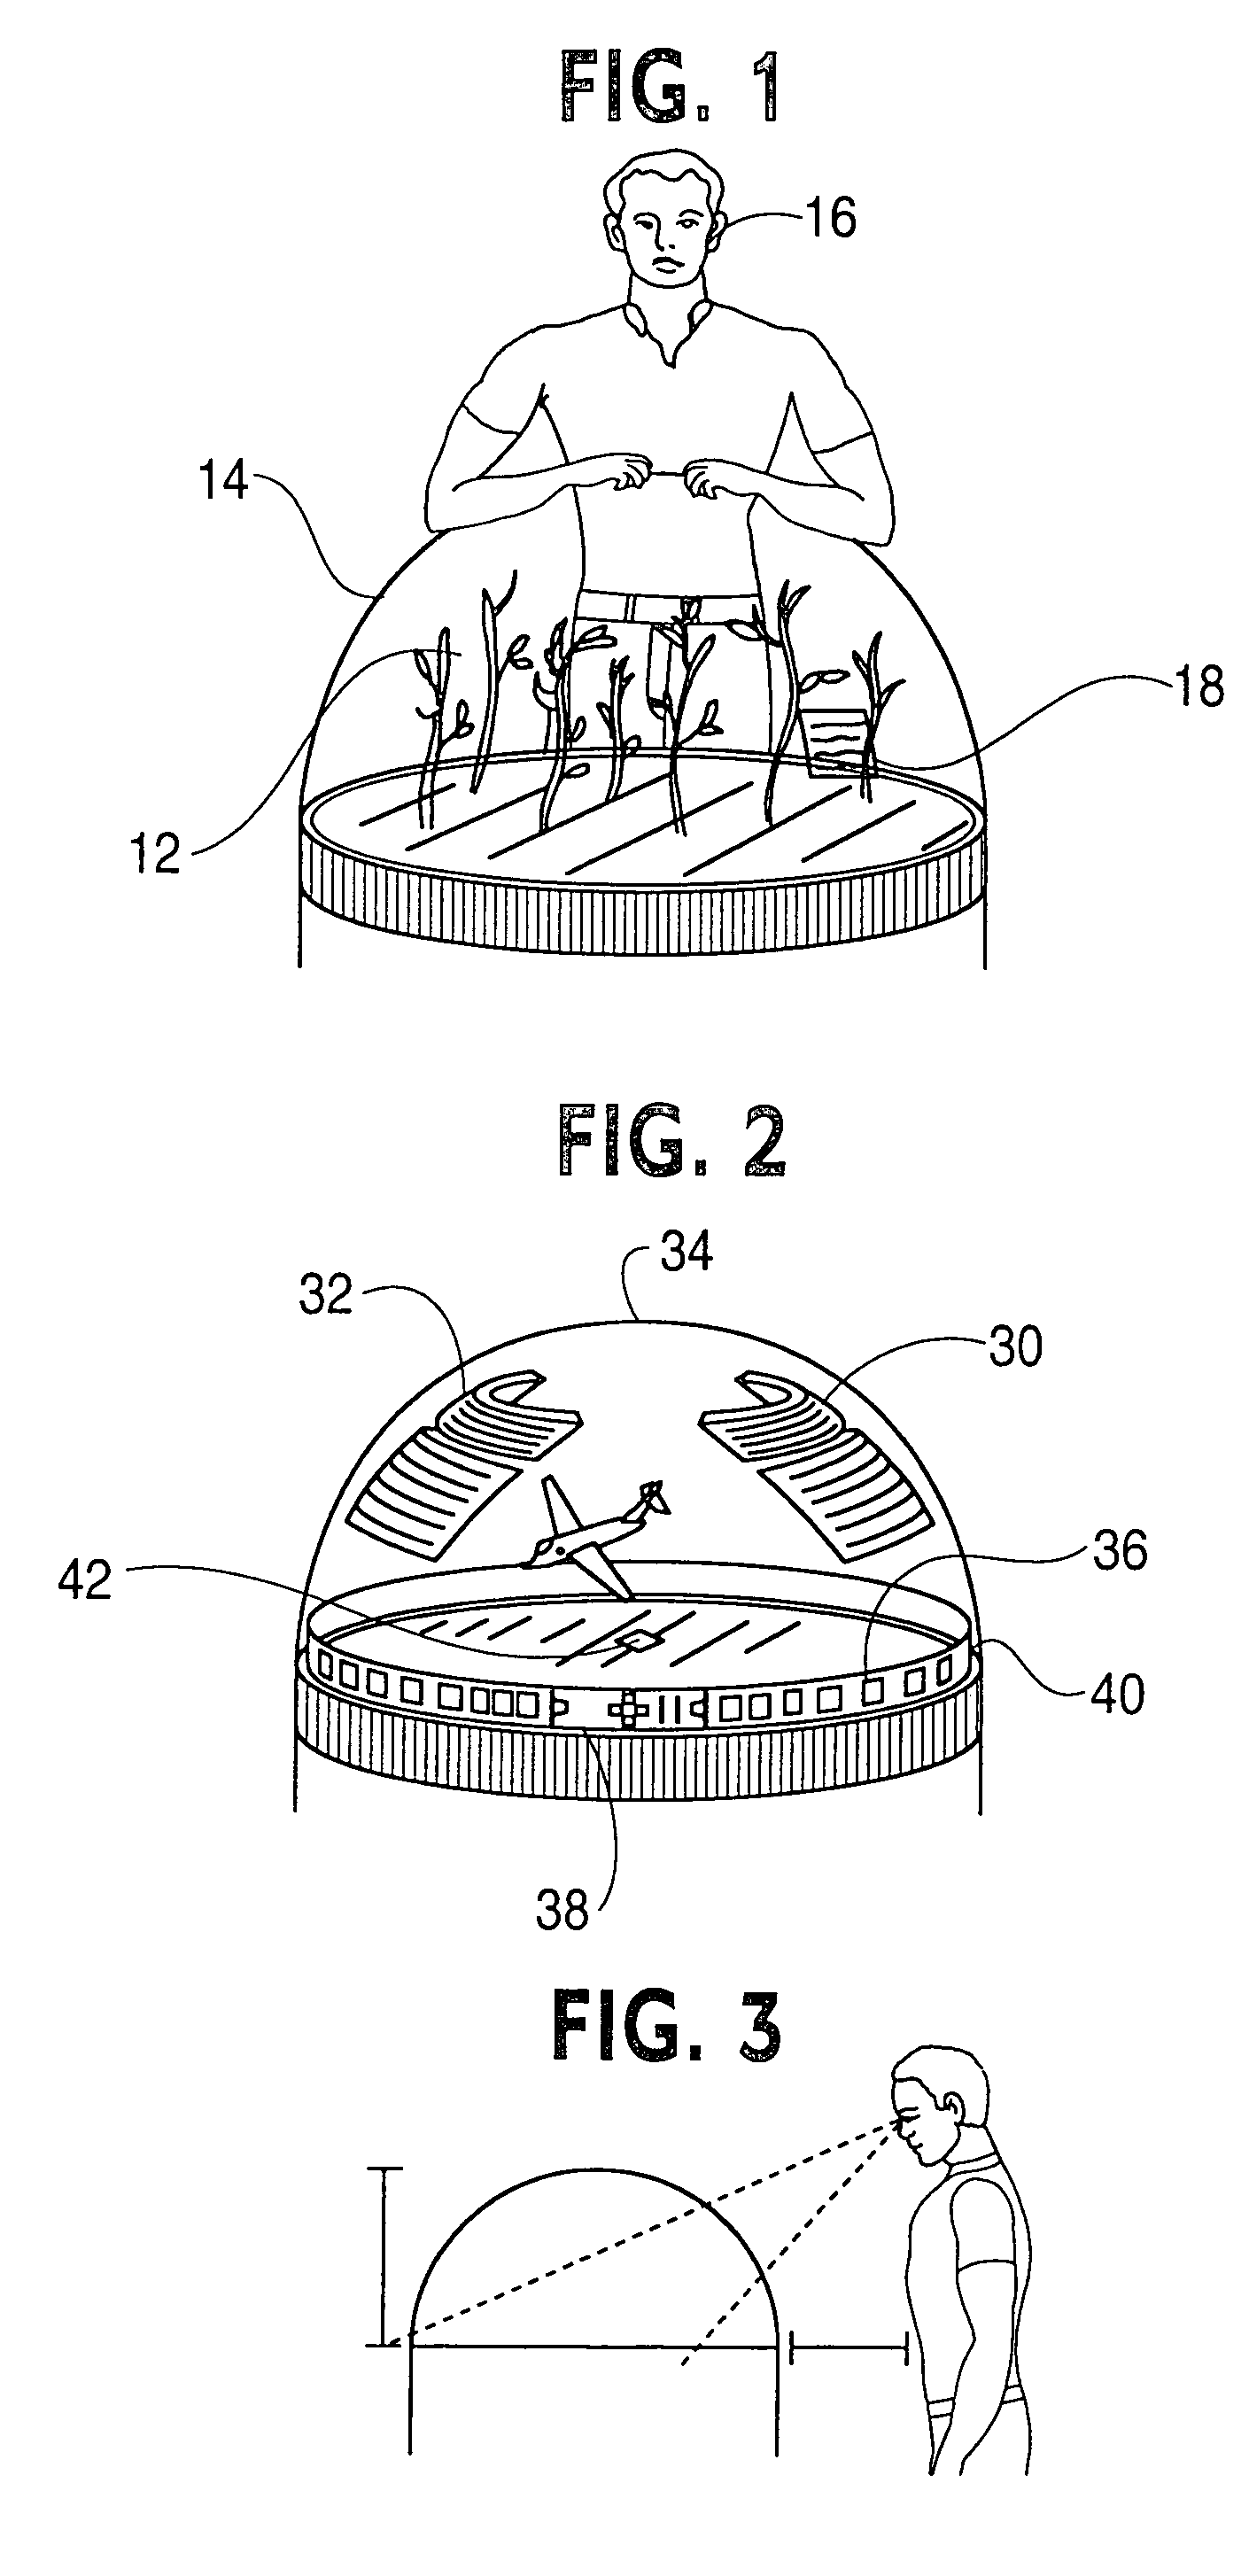 Widgets displayed and operable on a surface of a volumetric display enclosure